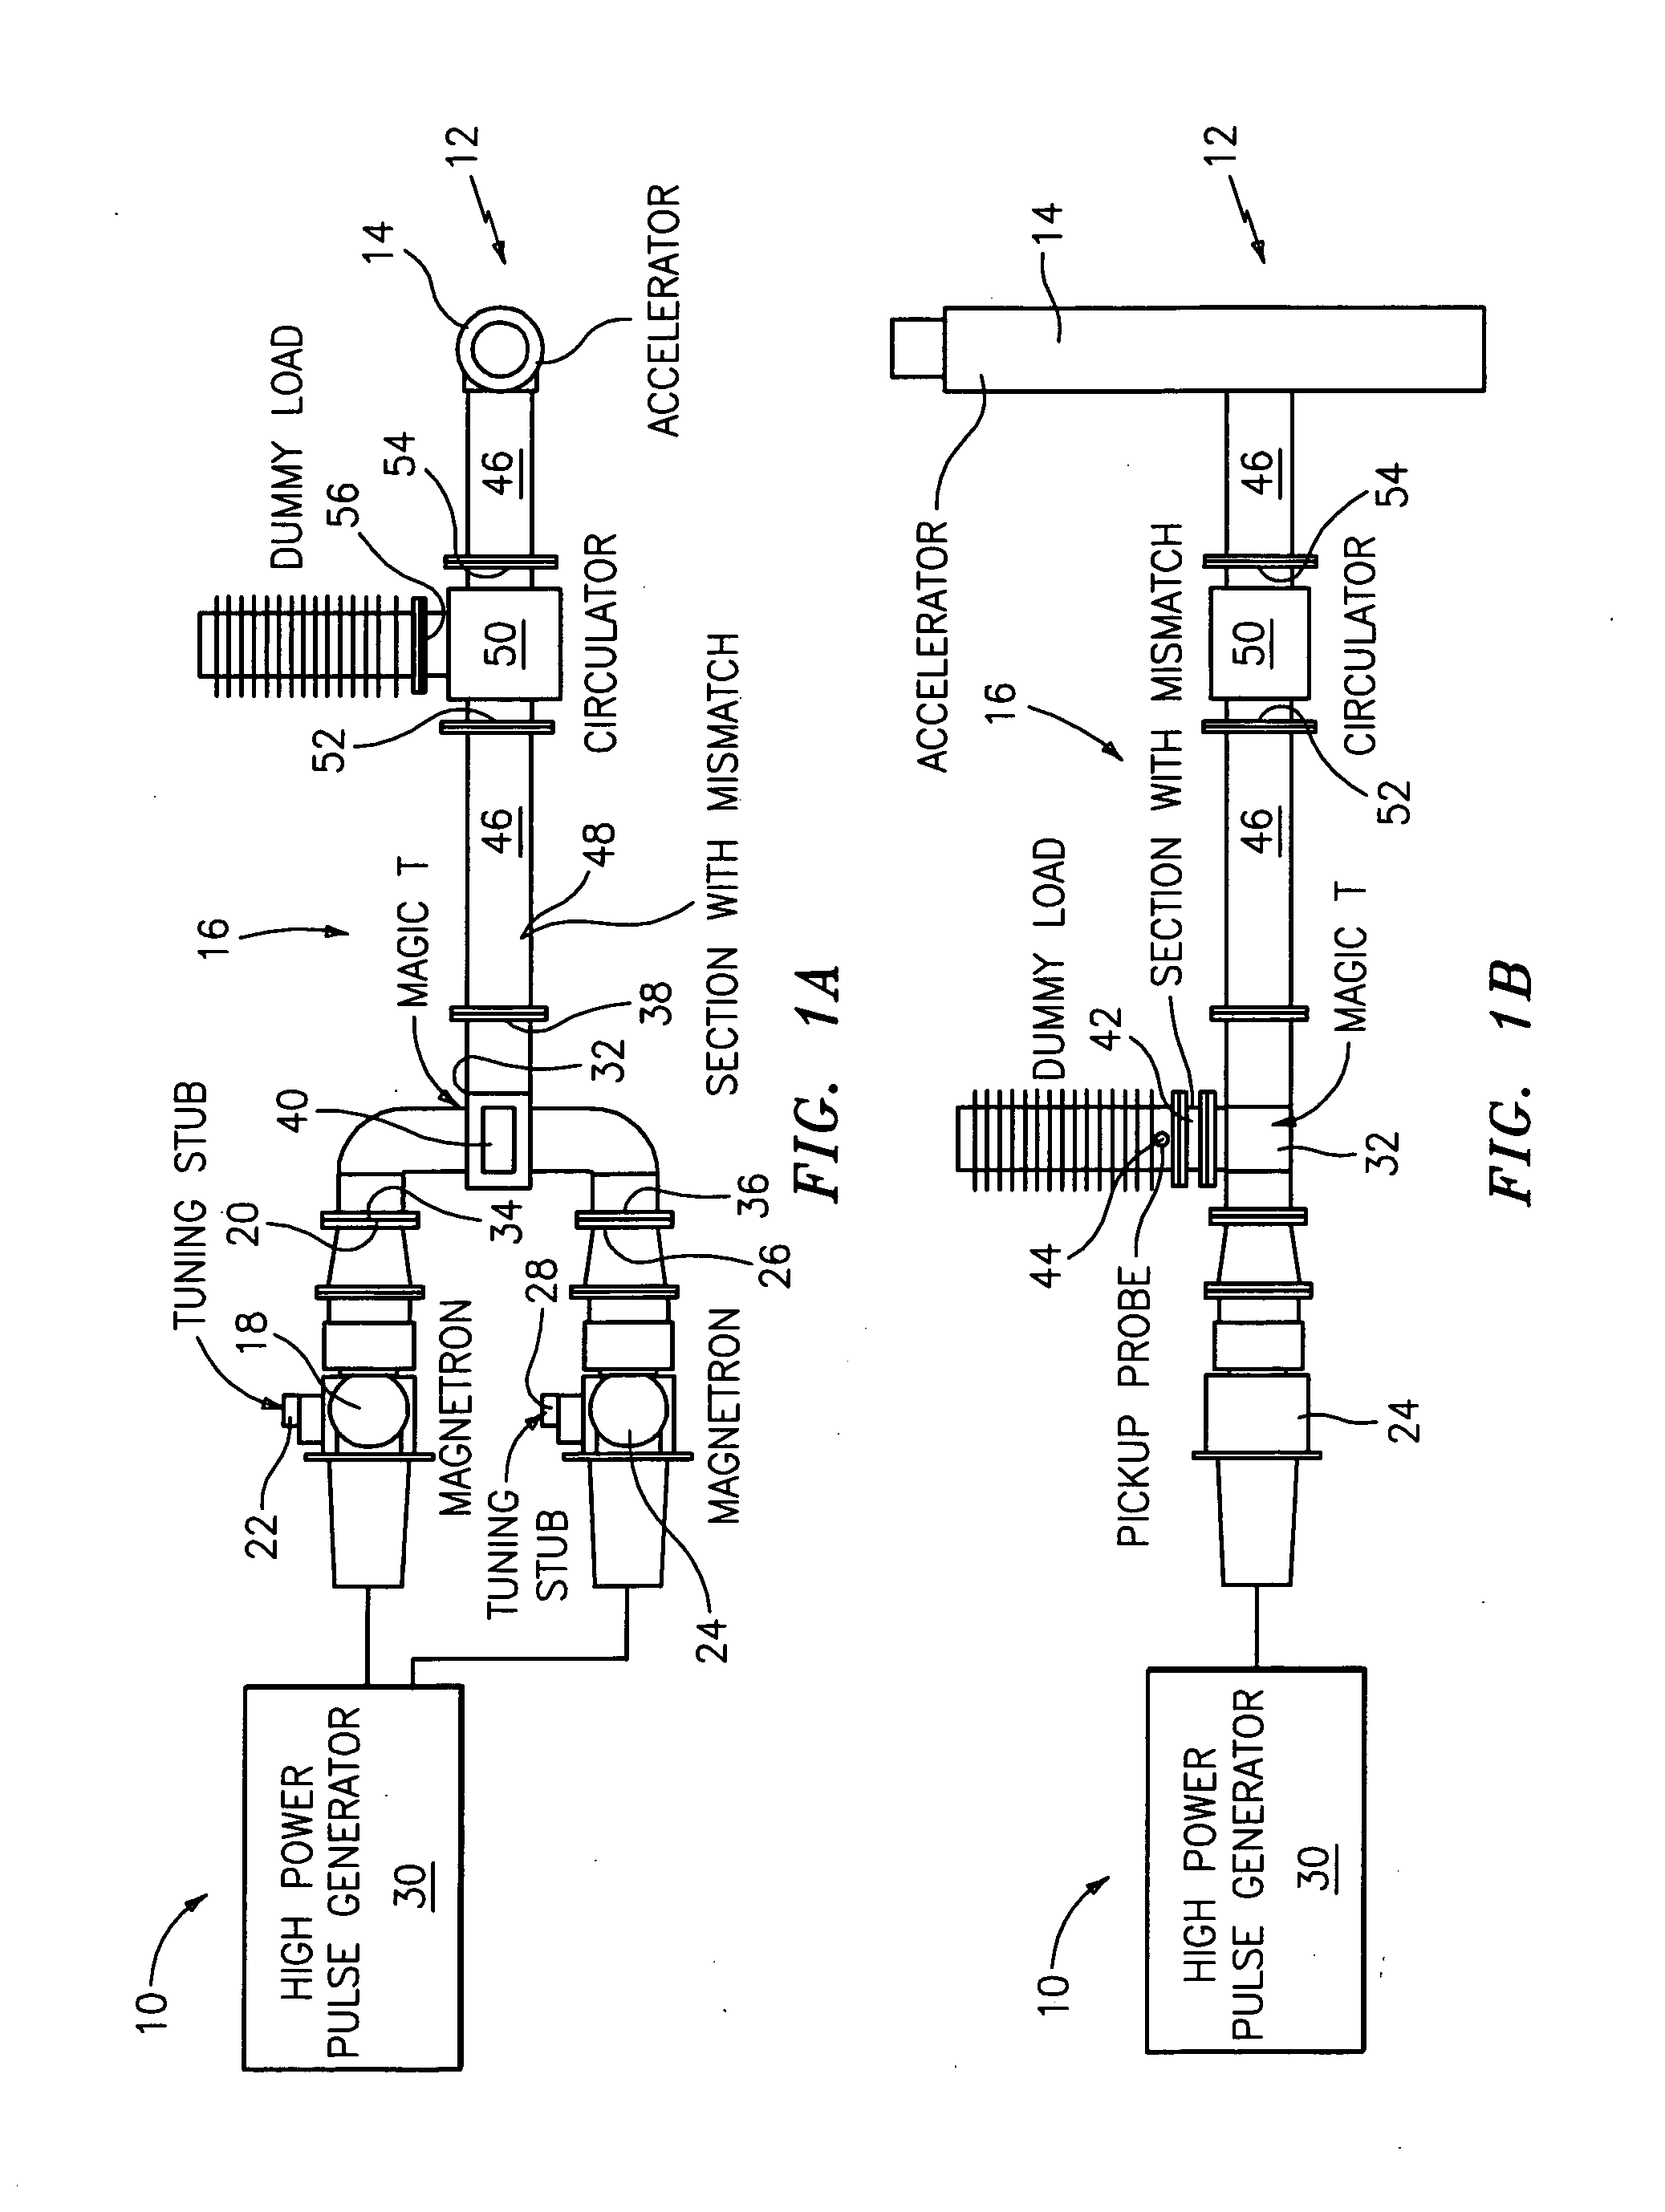 Microwave system for driving a linear accelerator